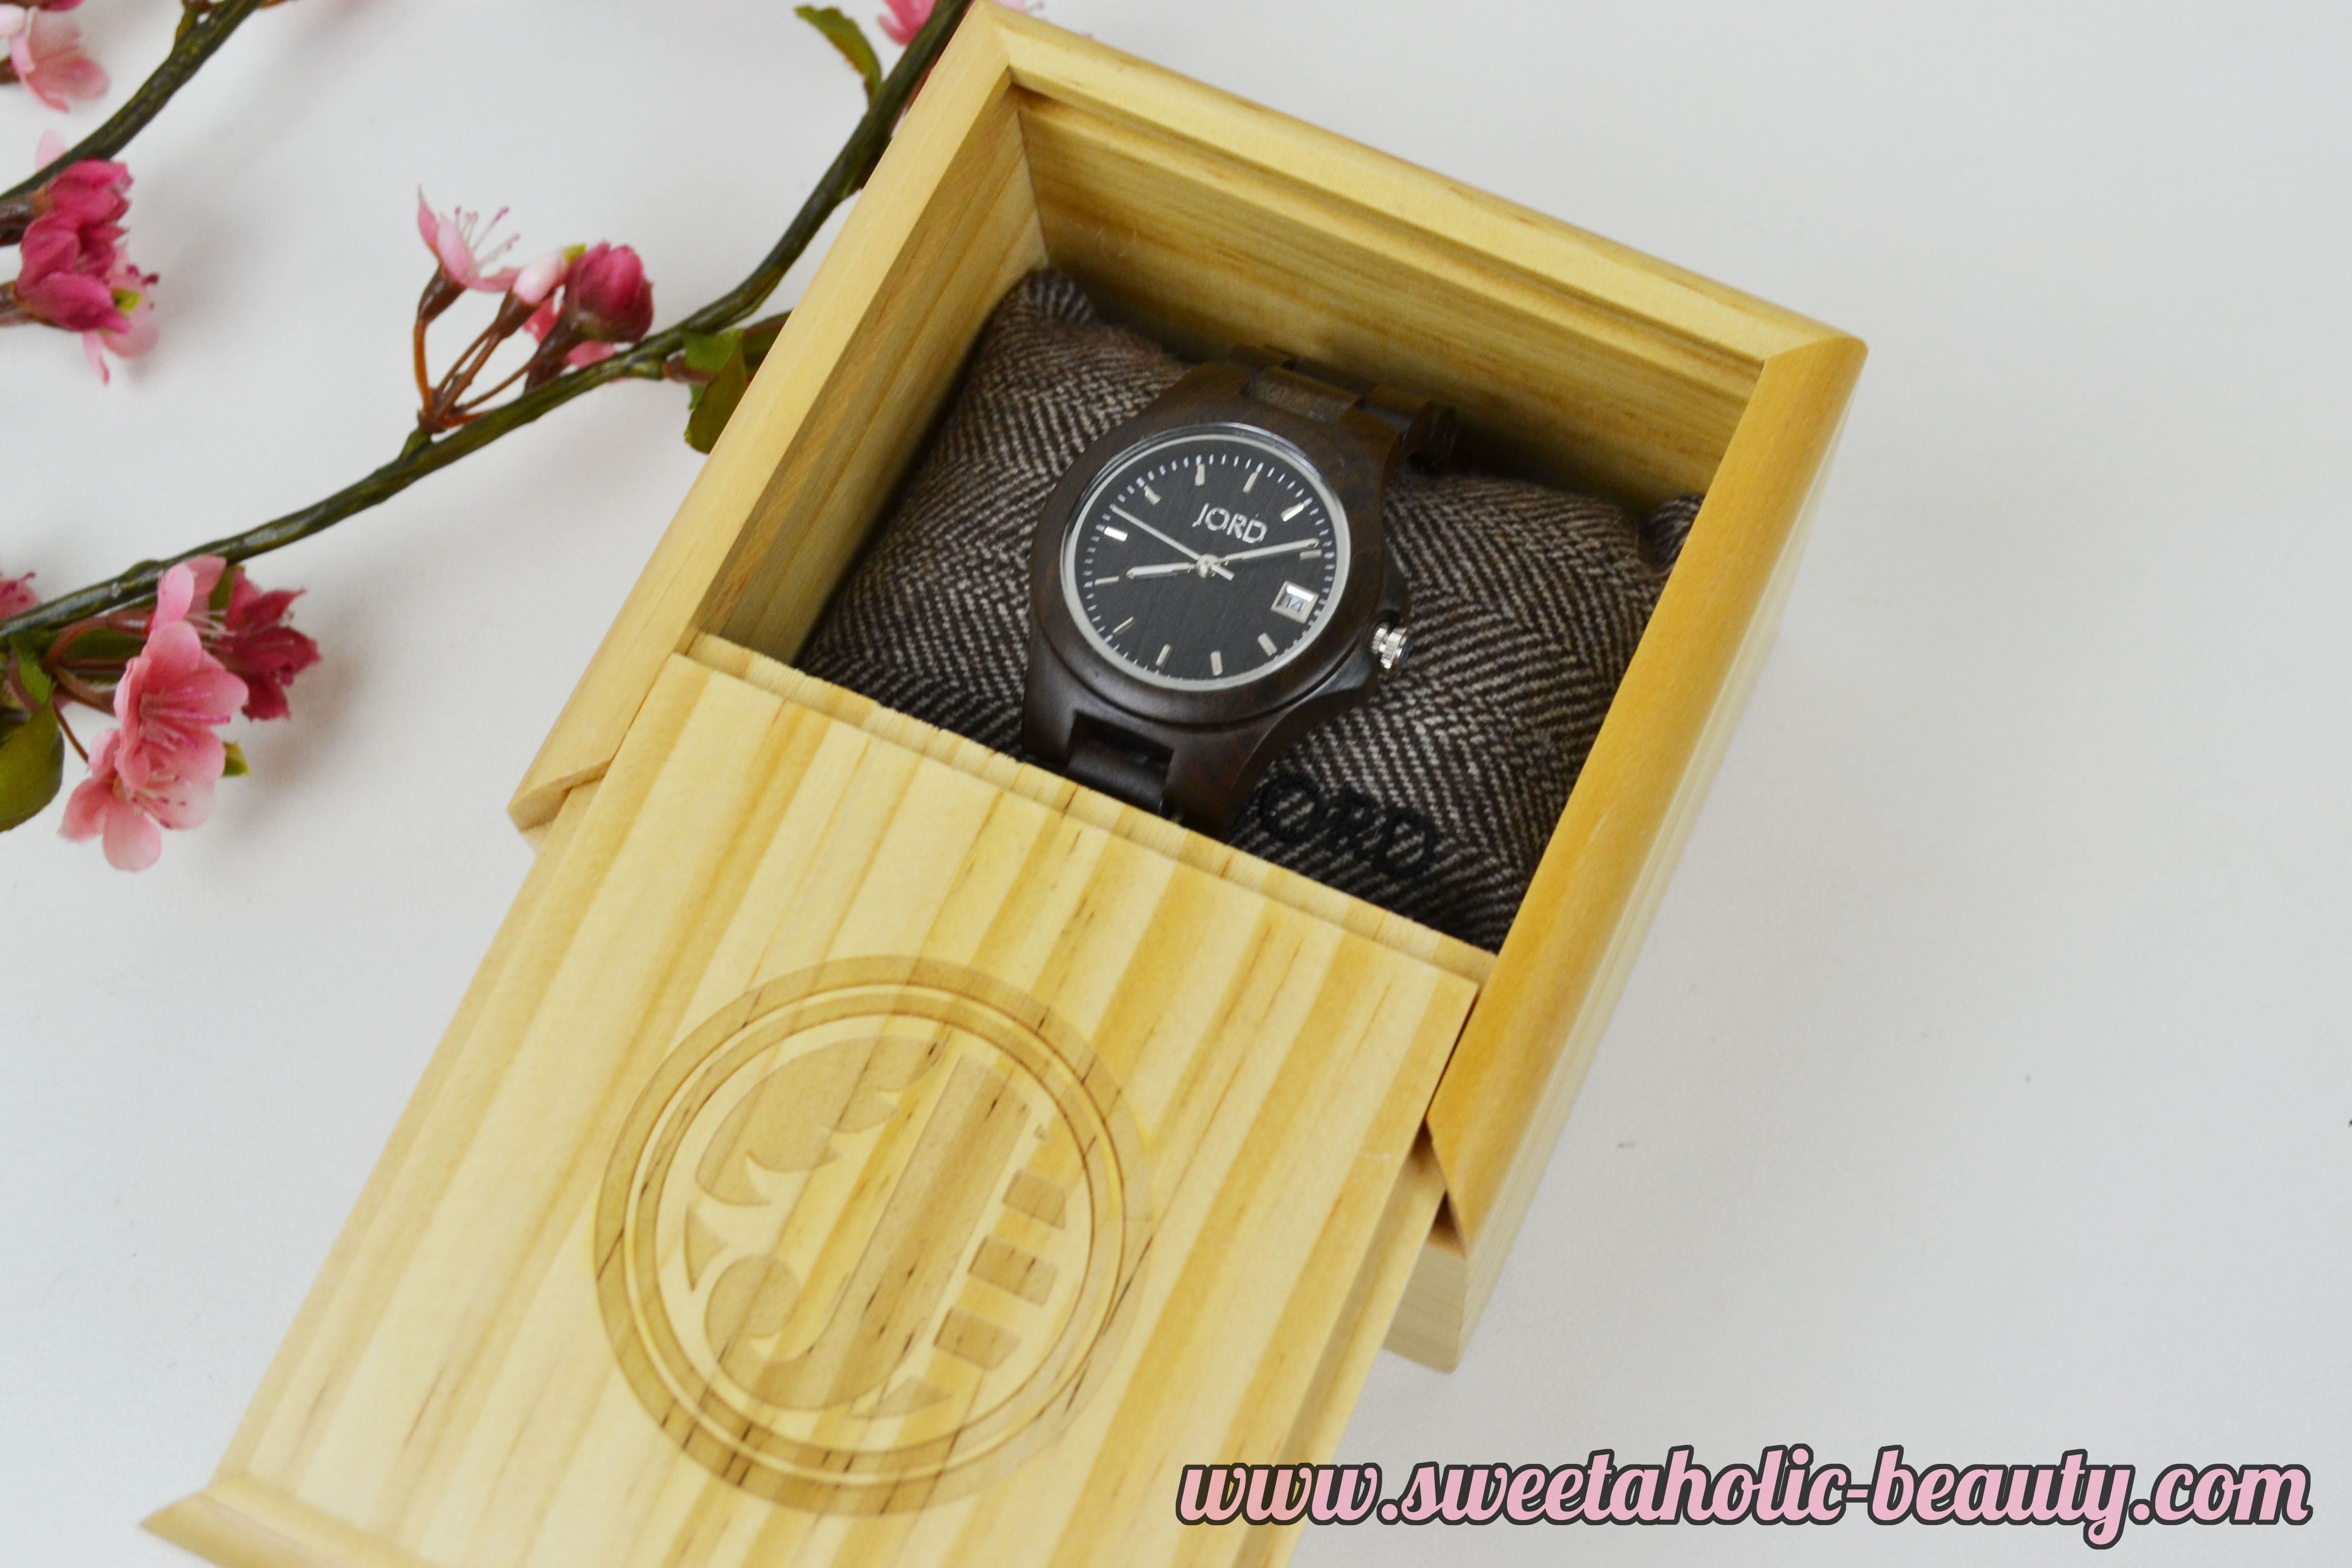 Jord Wood Watches Review - Sweetaholic Beauty